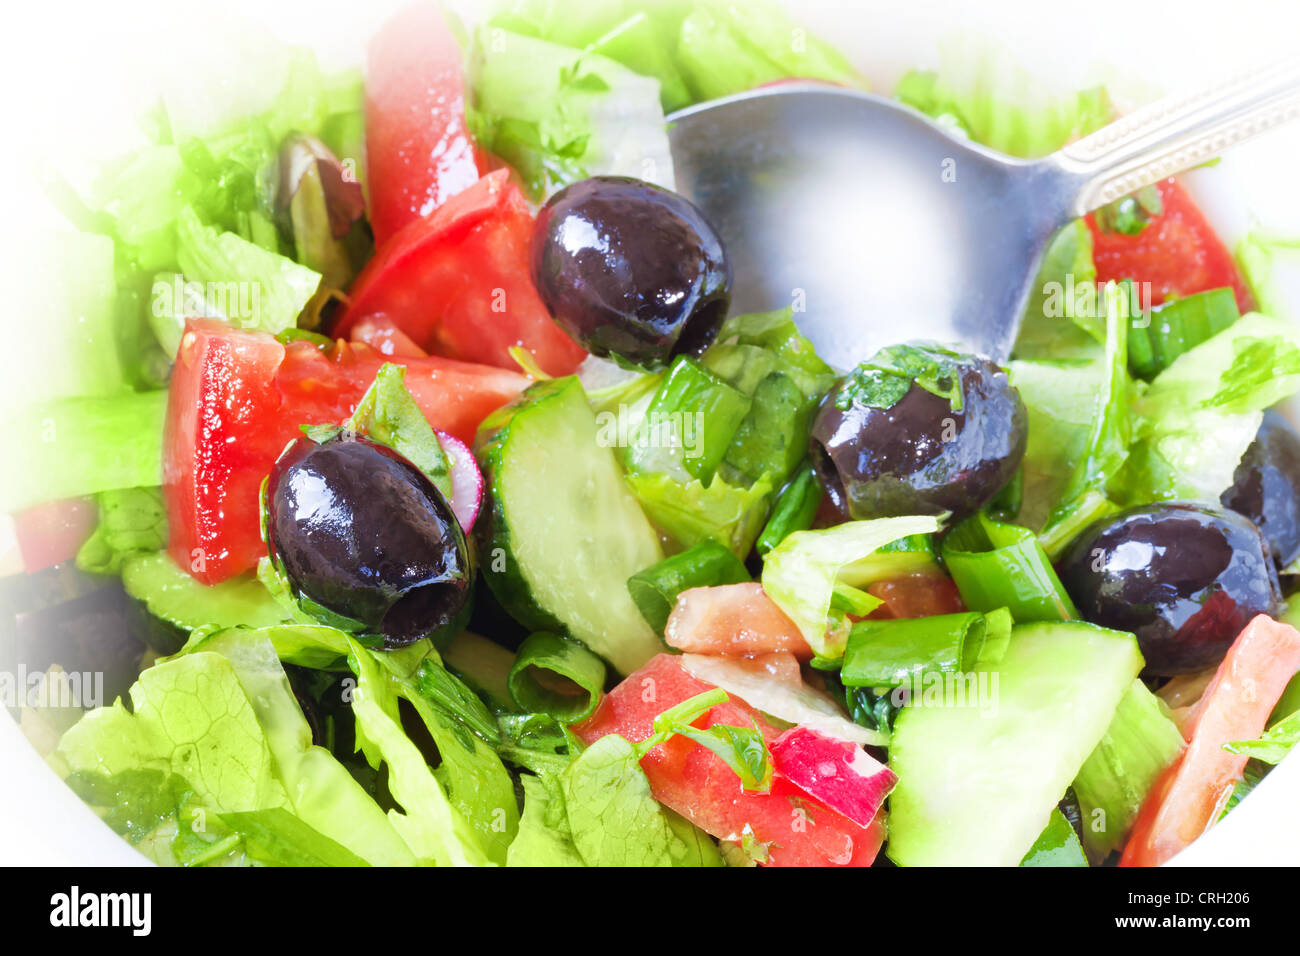 Closeup photo of fresh side dish with green salad, tomatoes, olives, cucumbers and a metal spoon Stock Photo